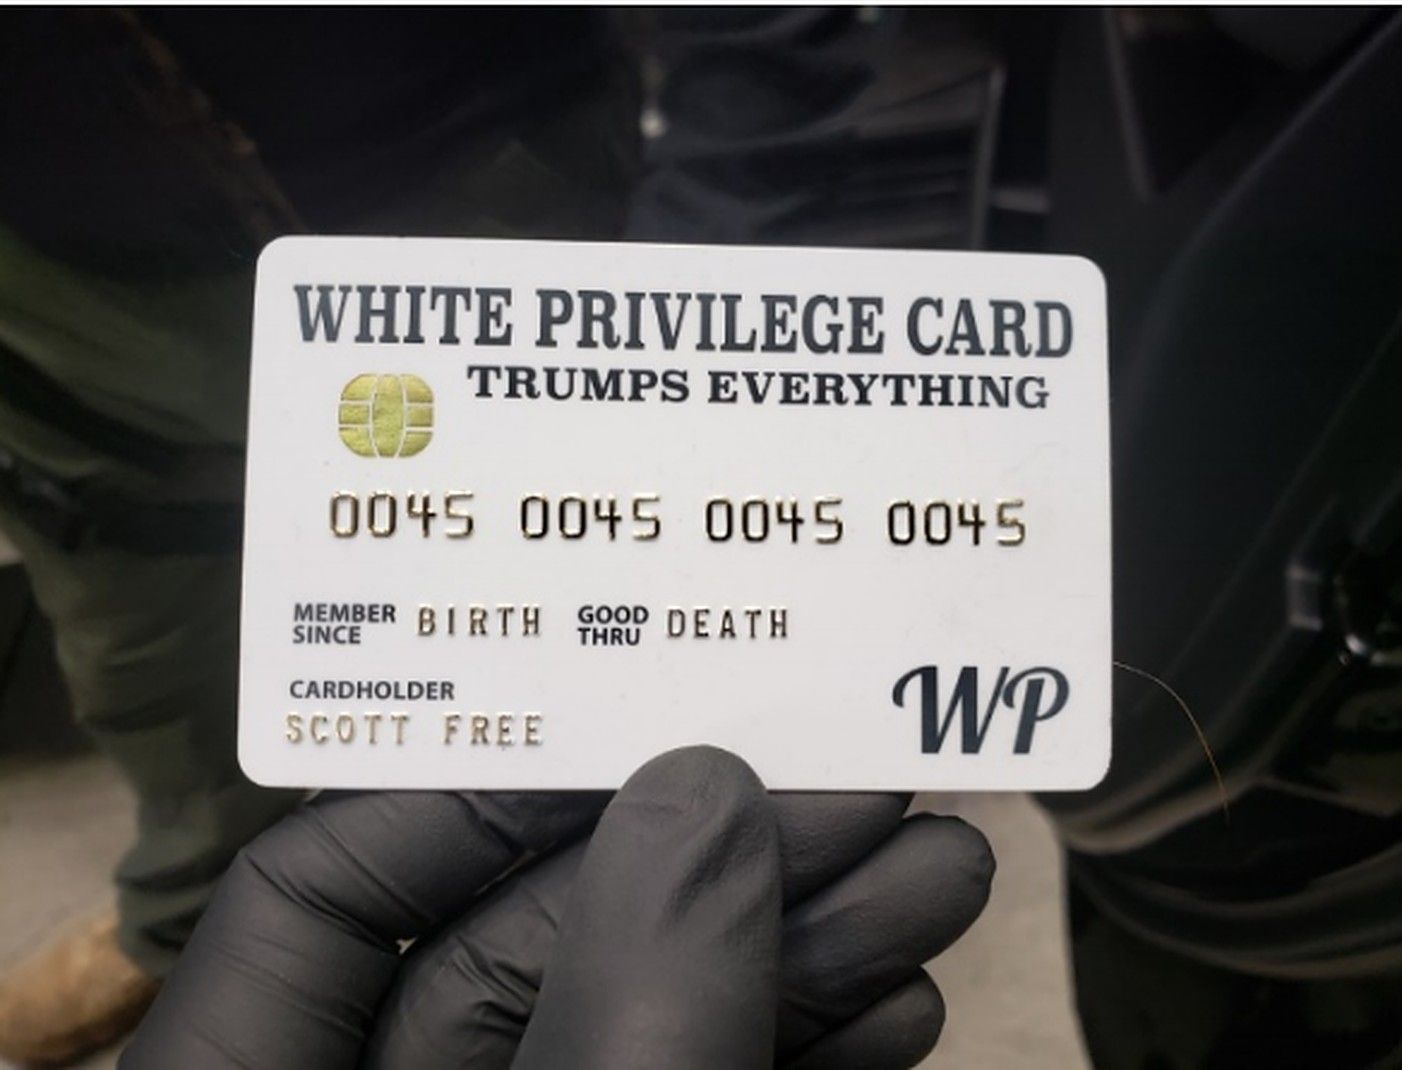 Officers found a "White Privilege Card" during the search